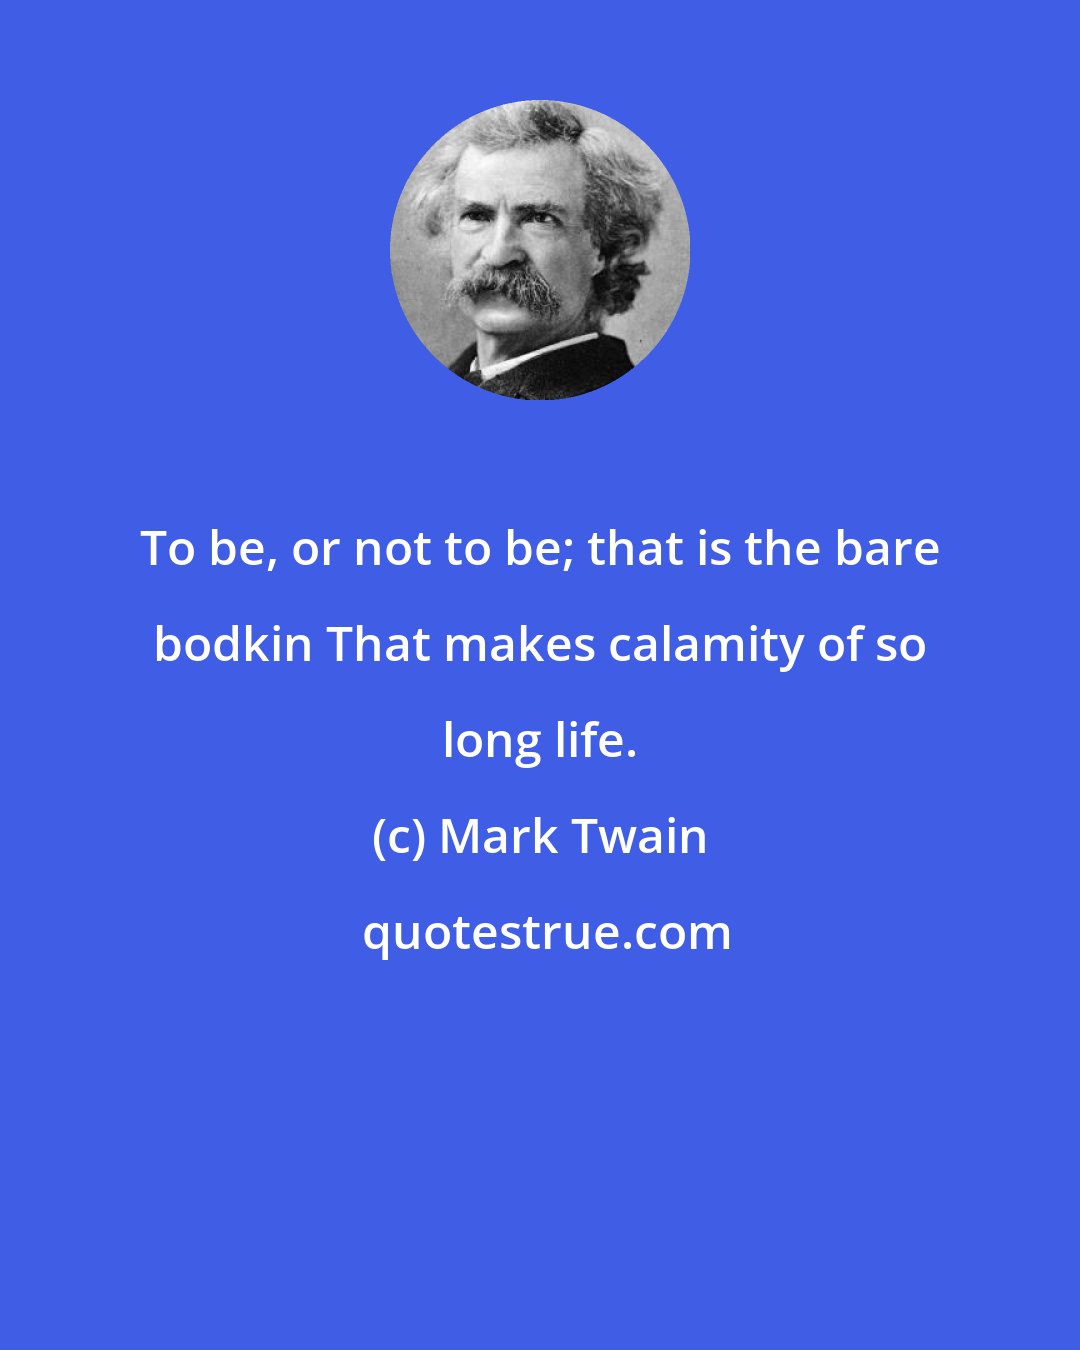 Mark Twain: To be, or not to be; that is the bare bodkin That makes calamity of so long life.